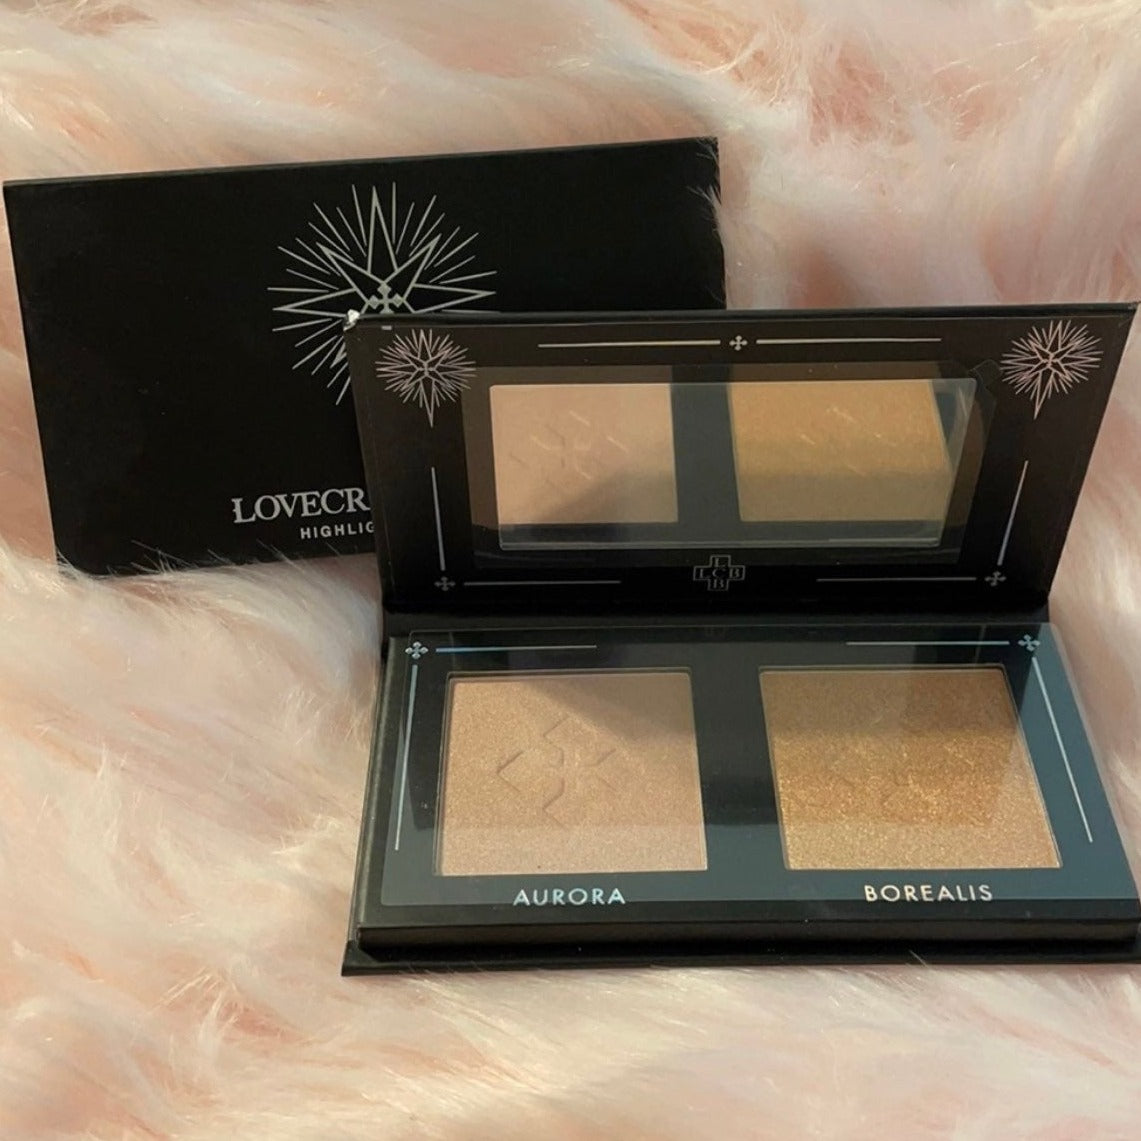 LOVECRAFT BEAUTY HIGHLIGHTER PALETTE IN THE COLOR AURORA & BOREALIS